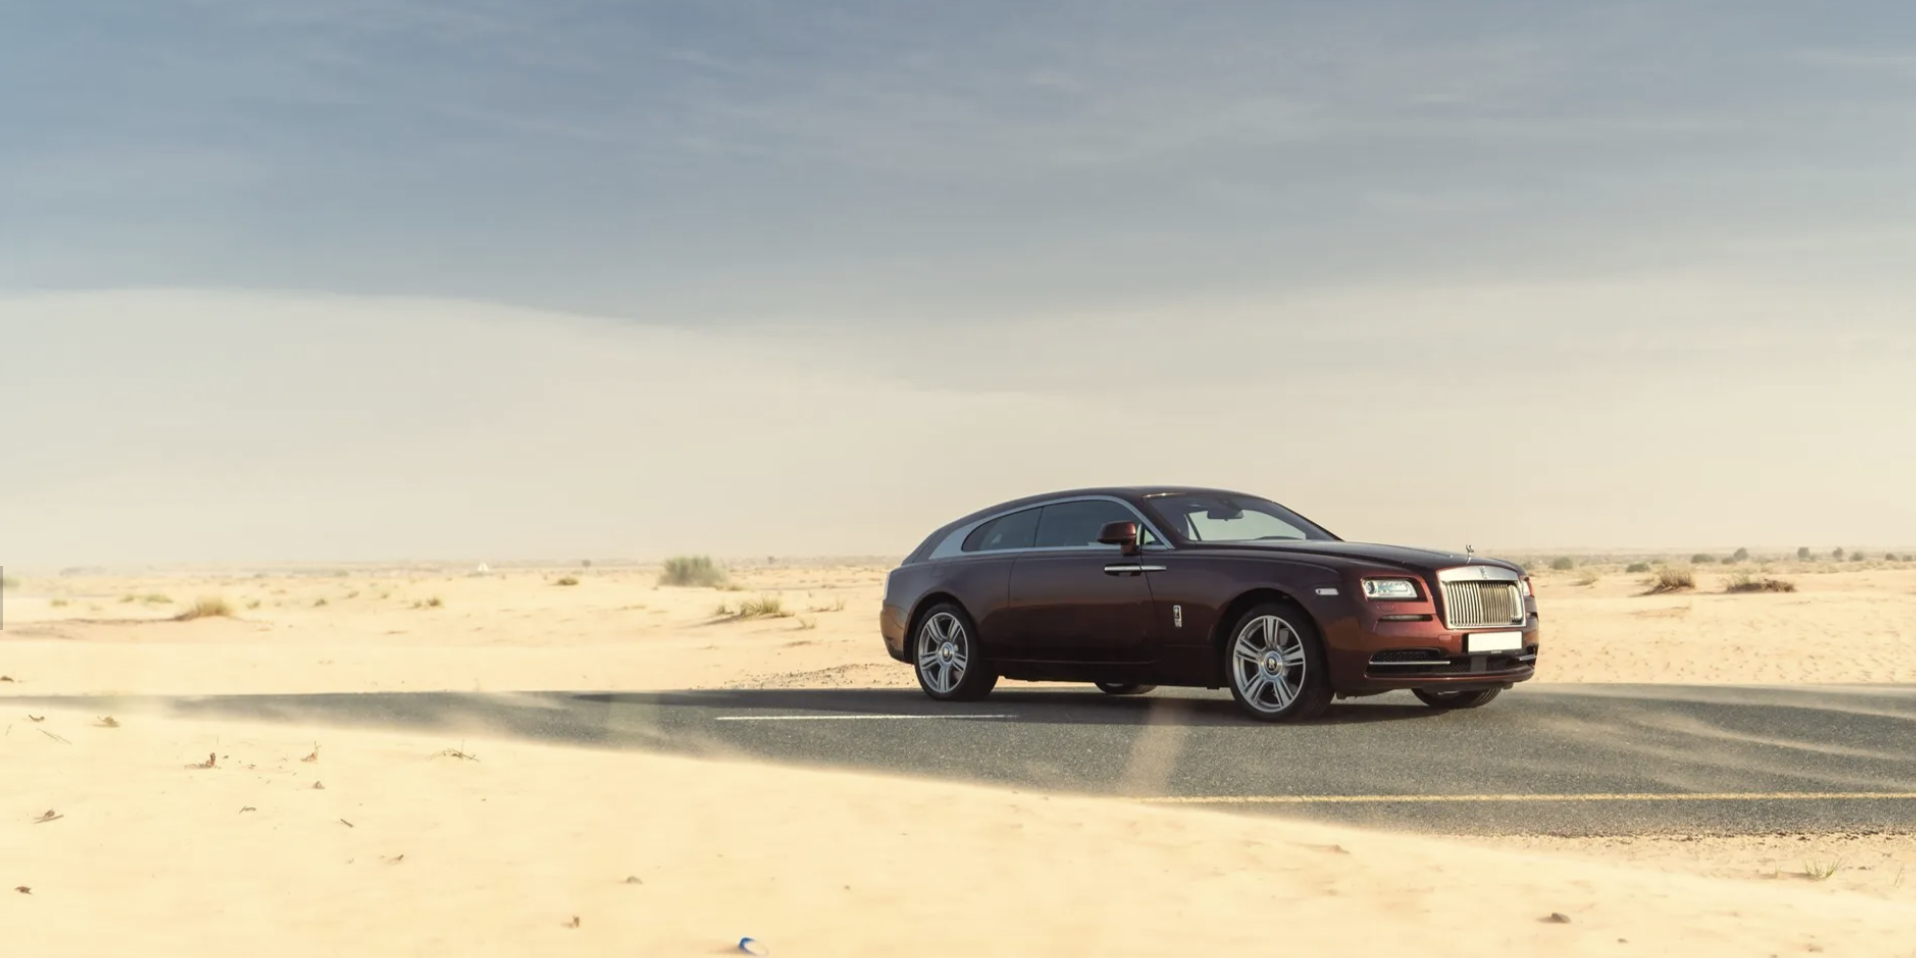 This One-Off Rolls-Royce Is the Classiest Shooting Brake Money Can Buy